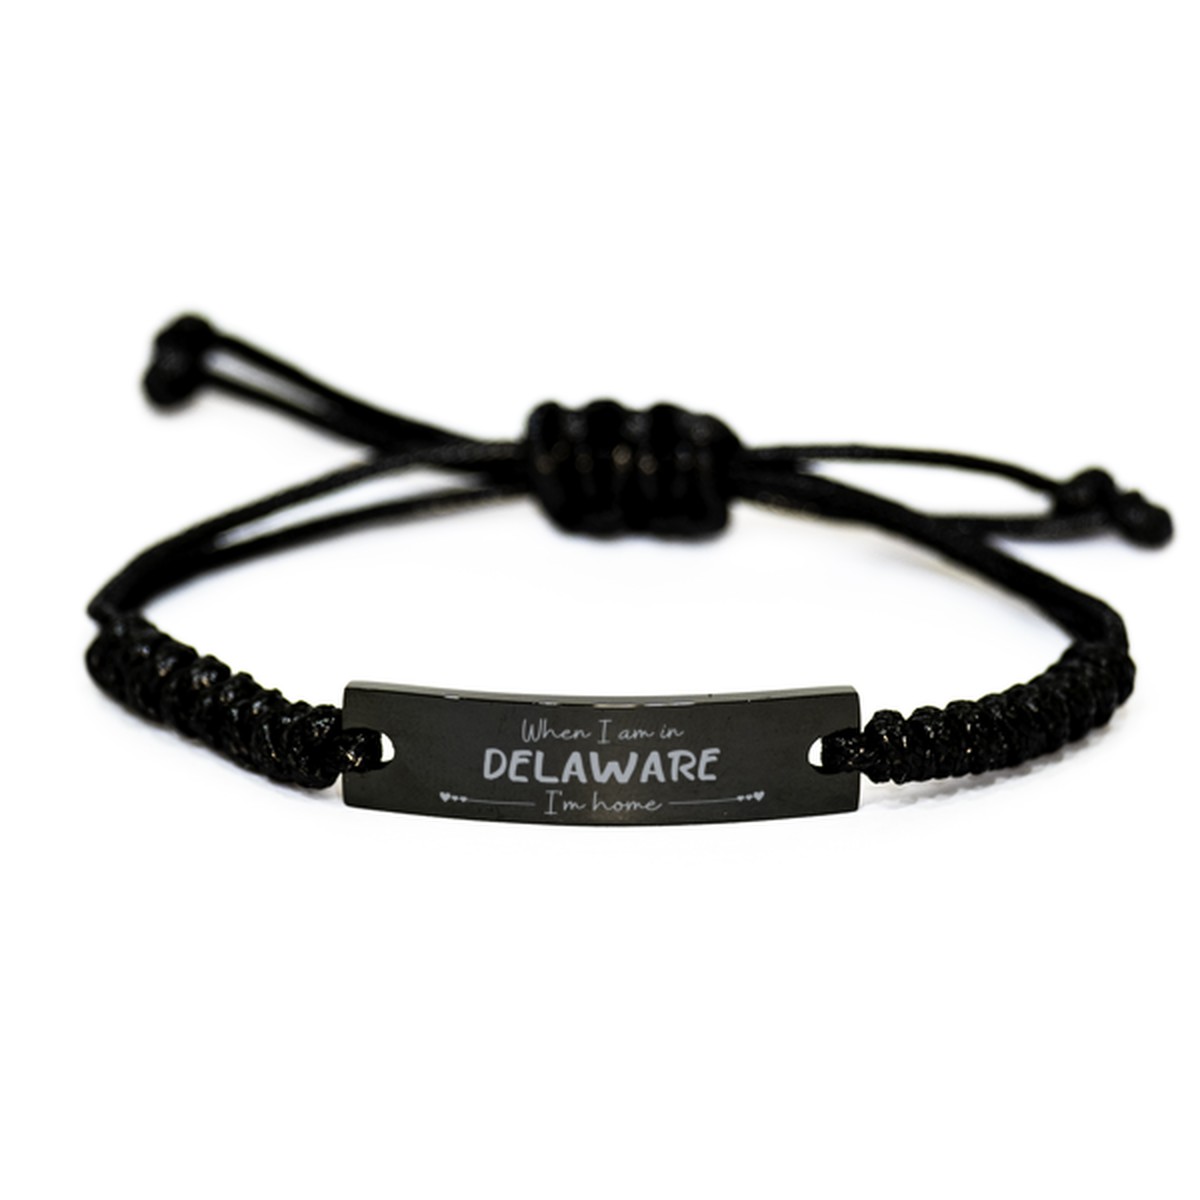 When I am in Delaware I'm home Black Rope Bracelet, Cheap Gifts For Delaware, State Delaware Birthday Gifts for Friends Coworker